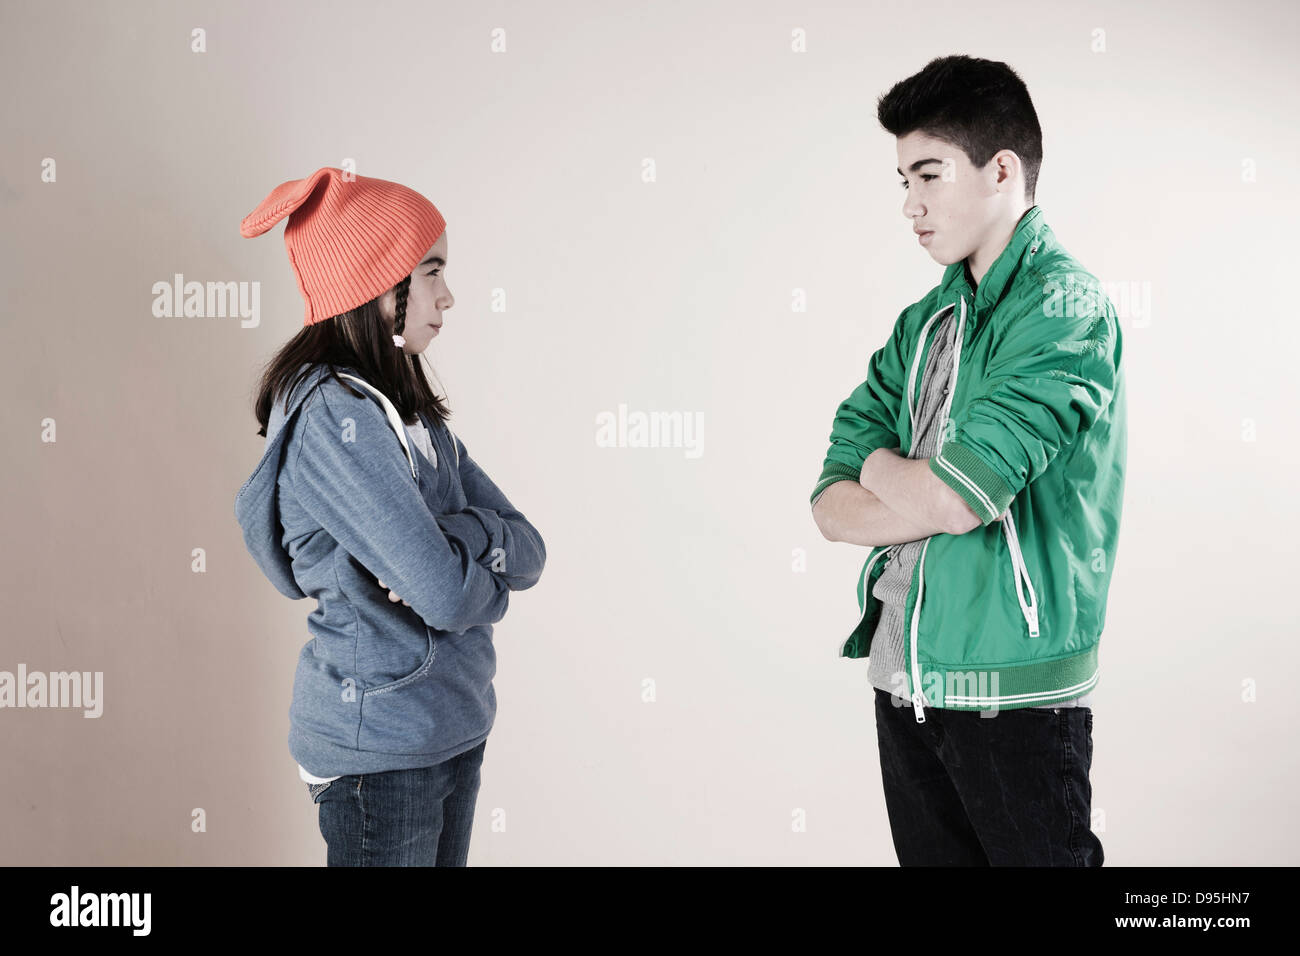 Boy and Girl Arguing in Studio Stock Photo